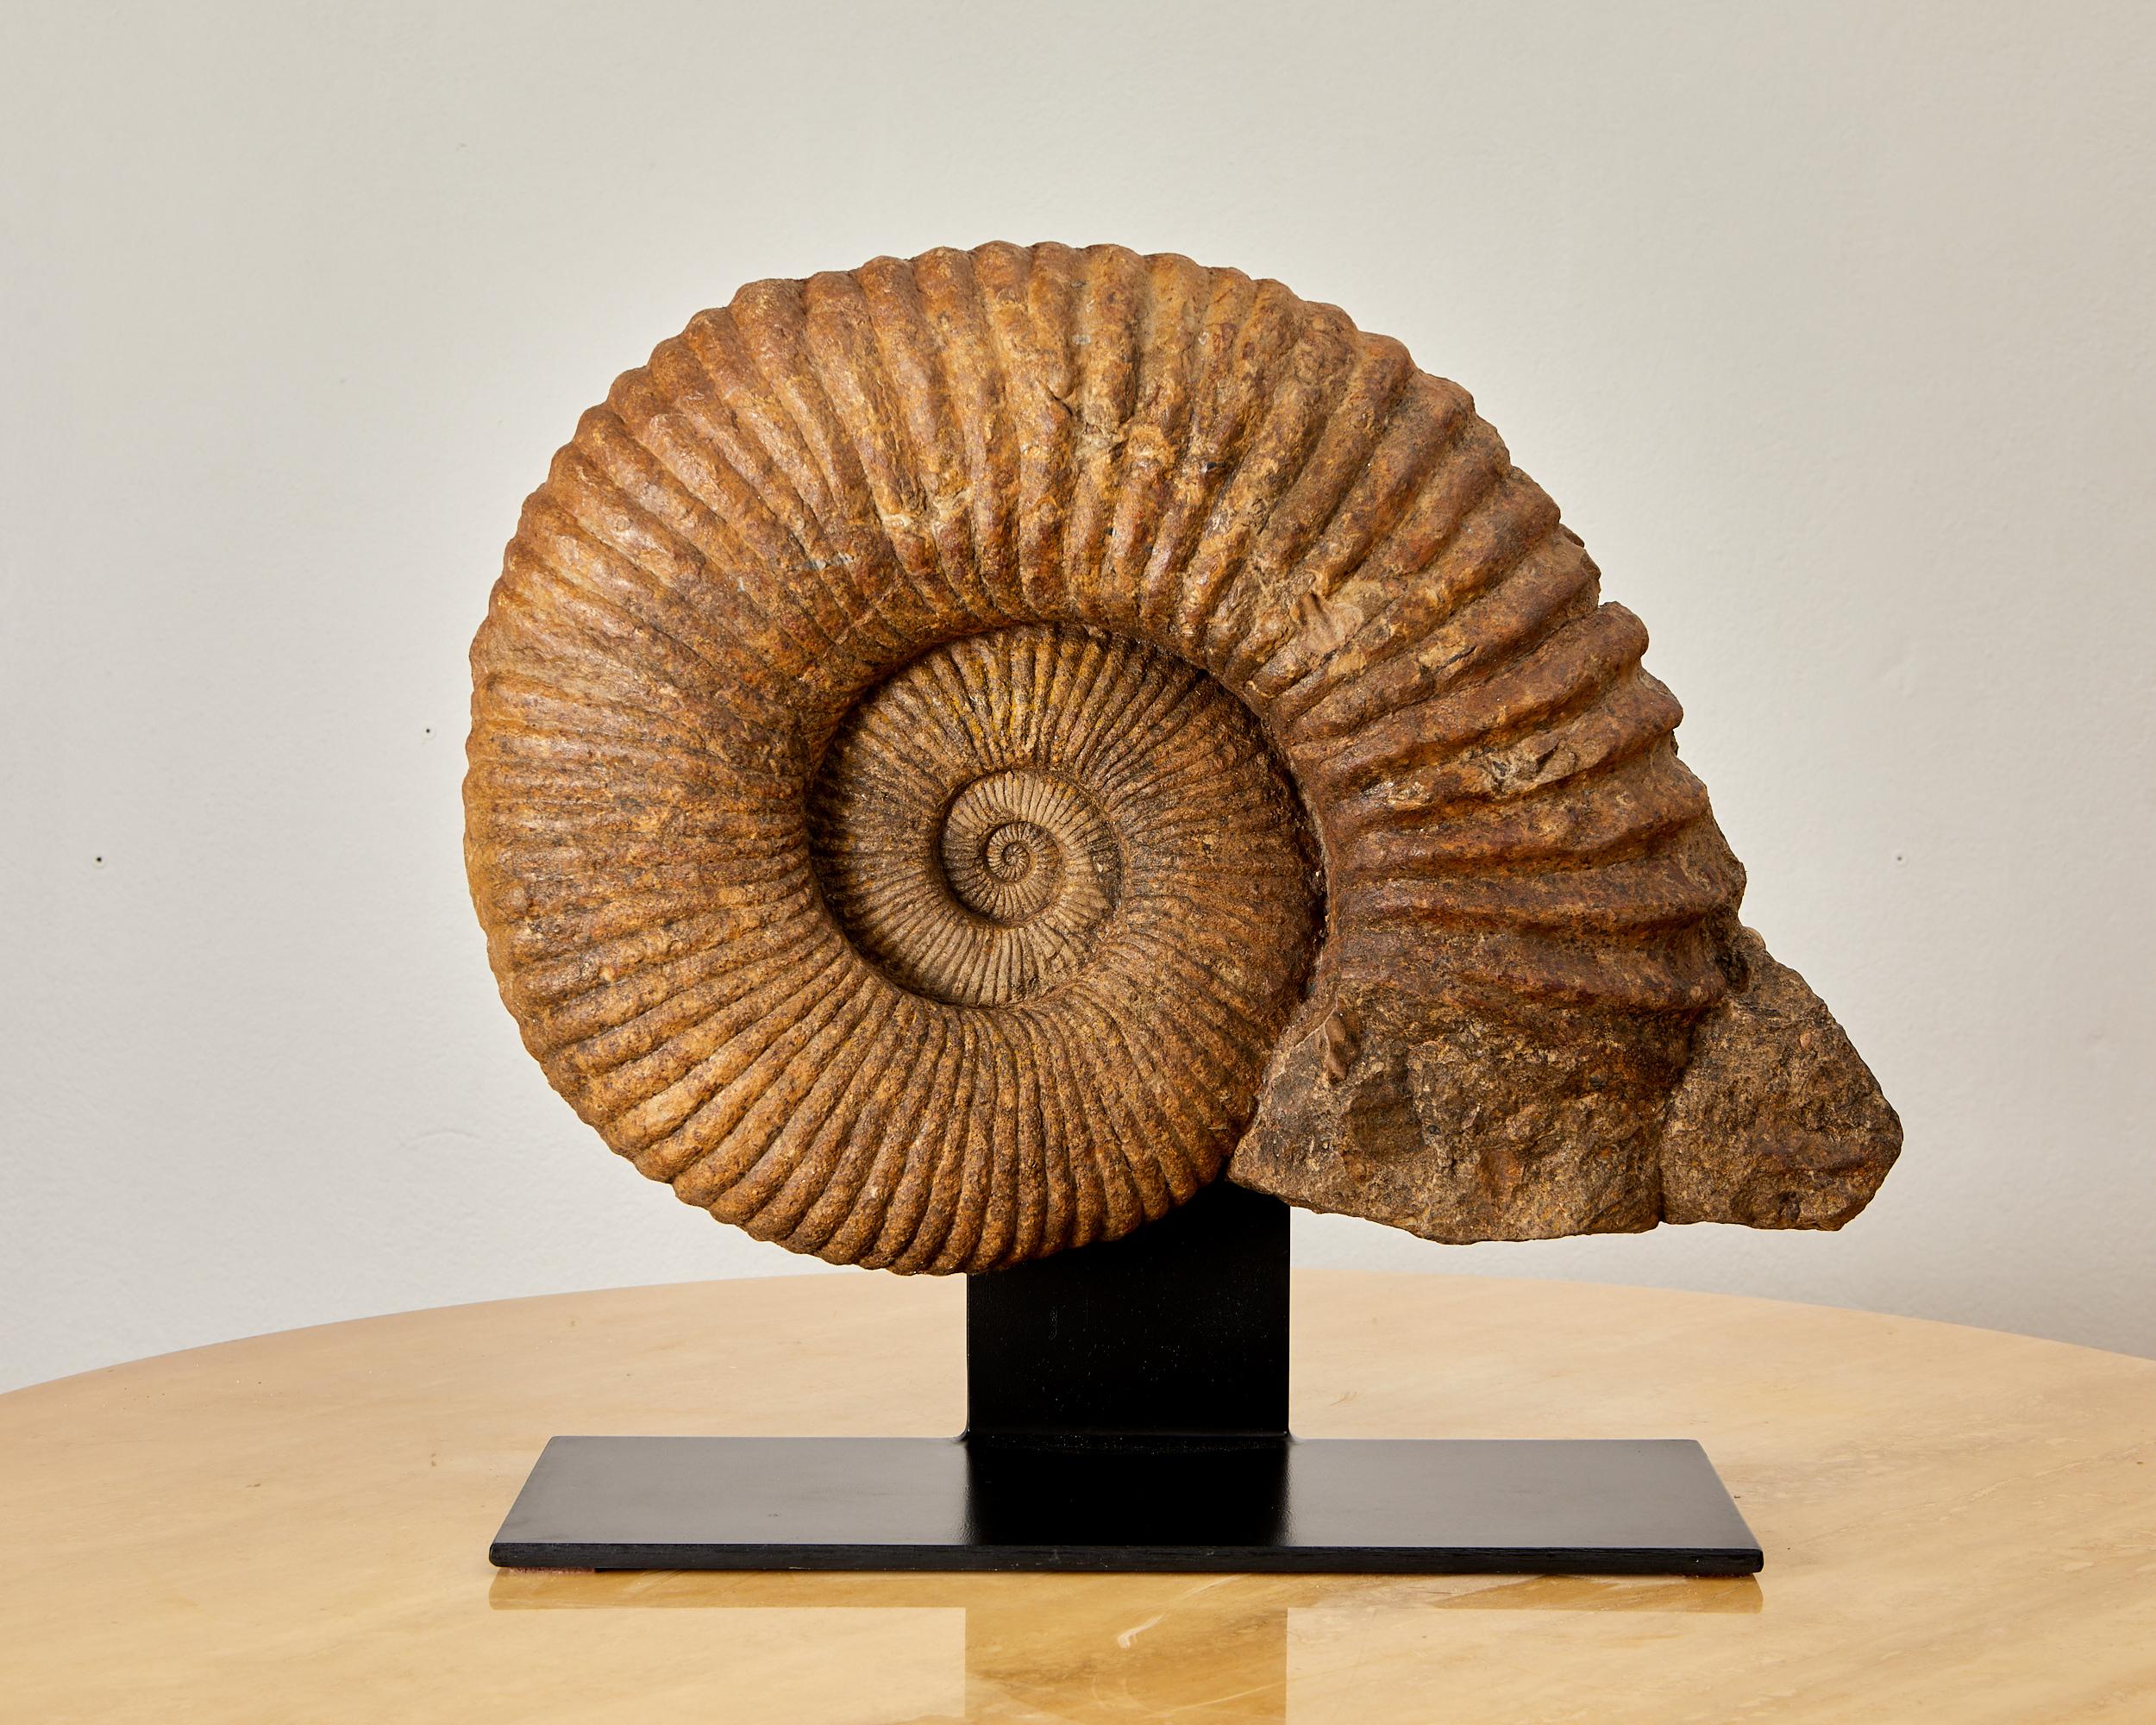 Magnificent fossil,
ammonite, France, Prehistoric,
approximately 335 million years of existence.
Height 55 cm, width 58 cm.